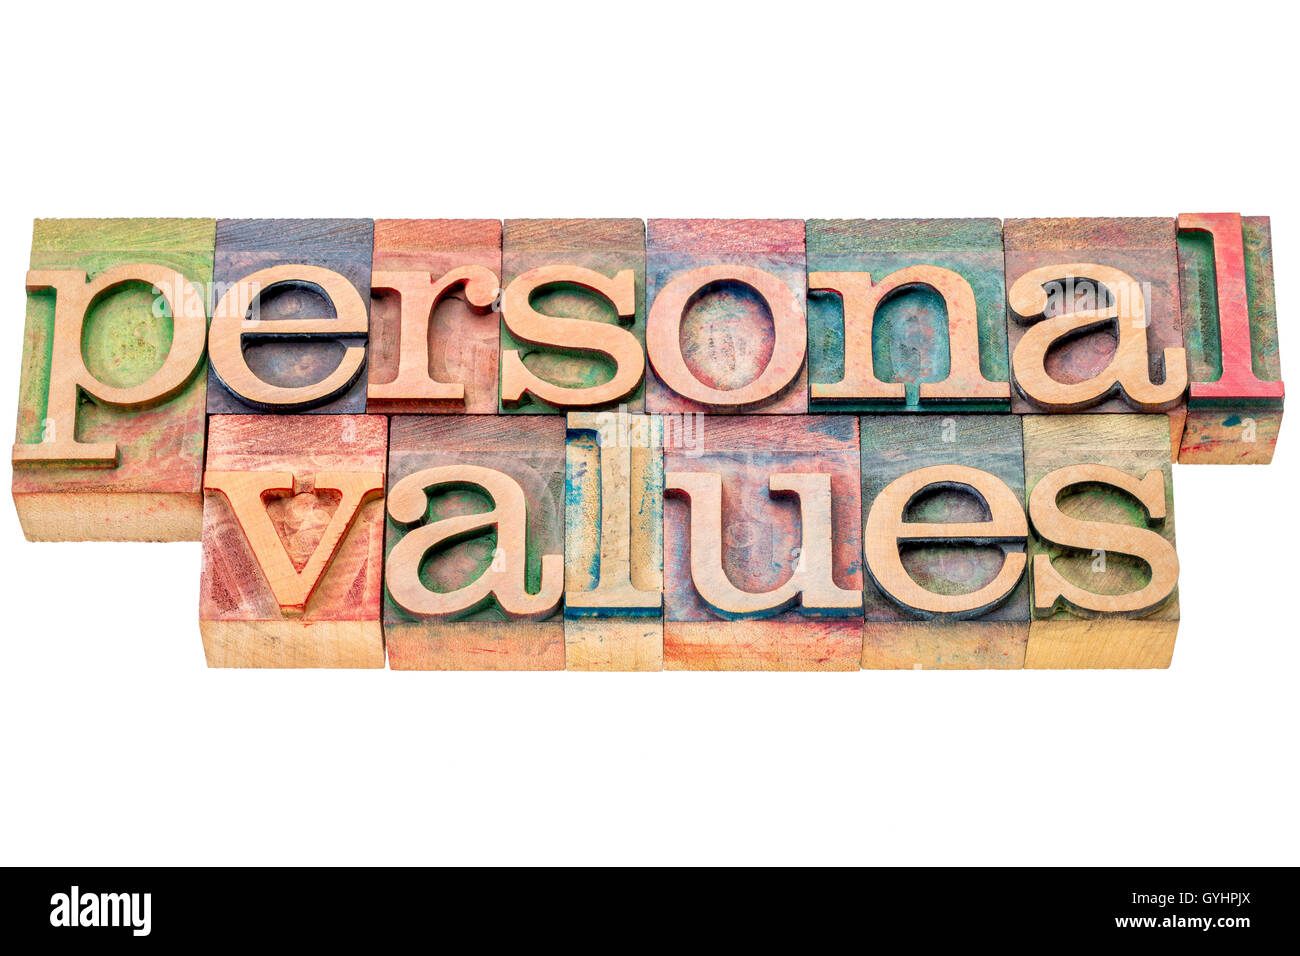 Value in words. Personal value. Values picture. Personal values pictures. Value Words.